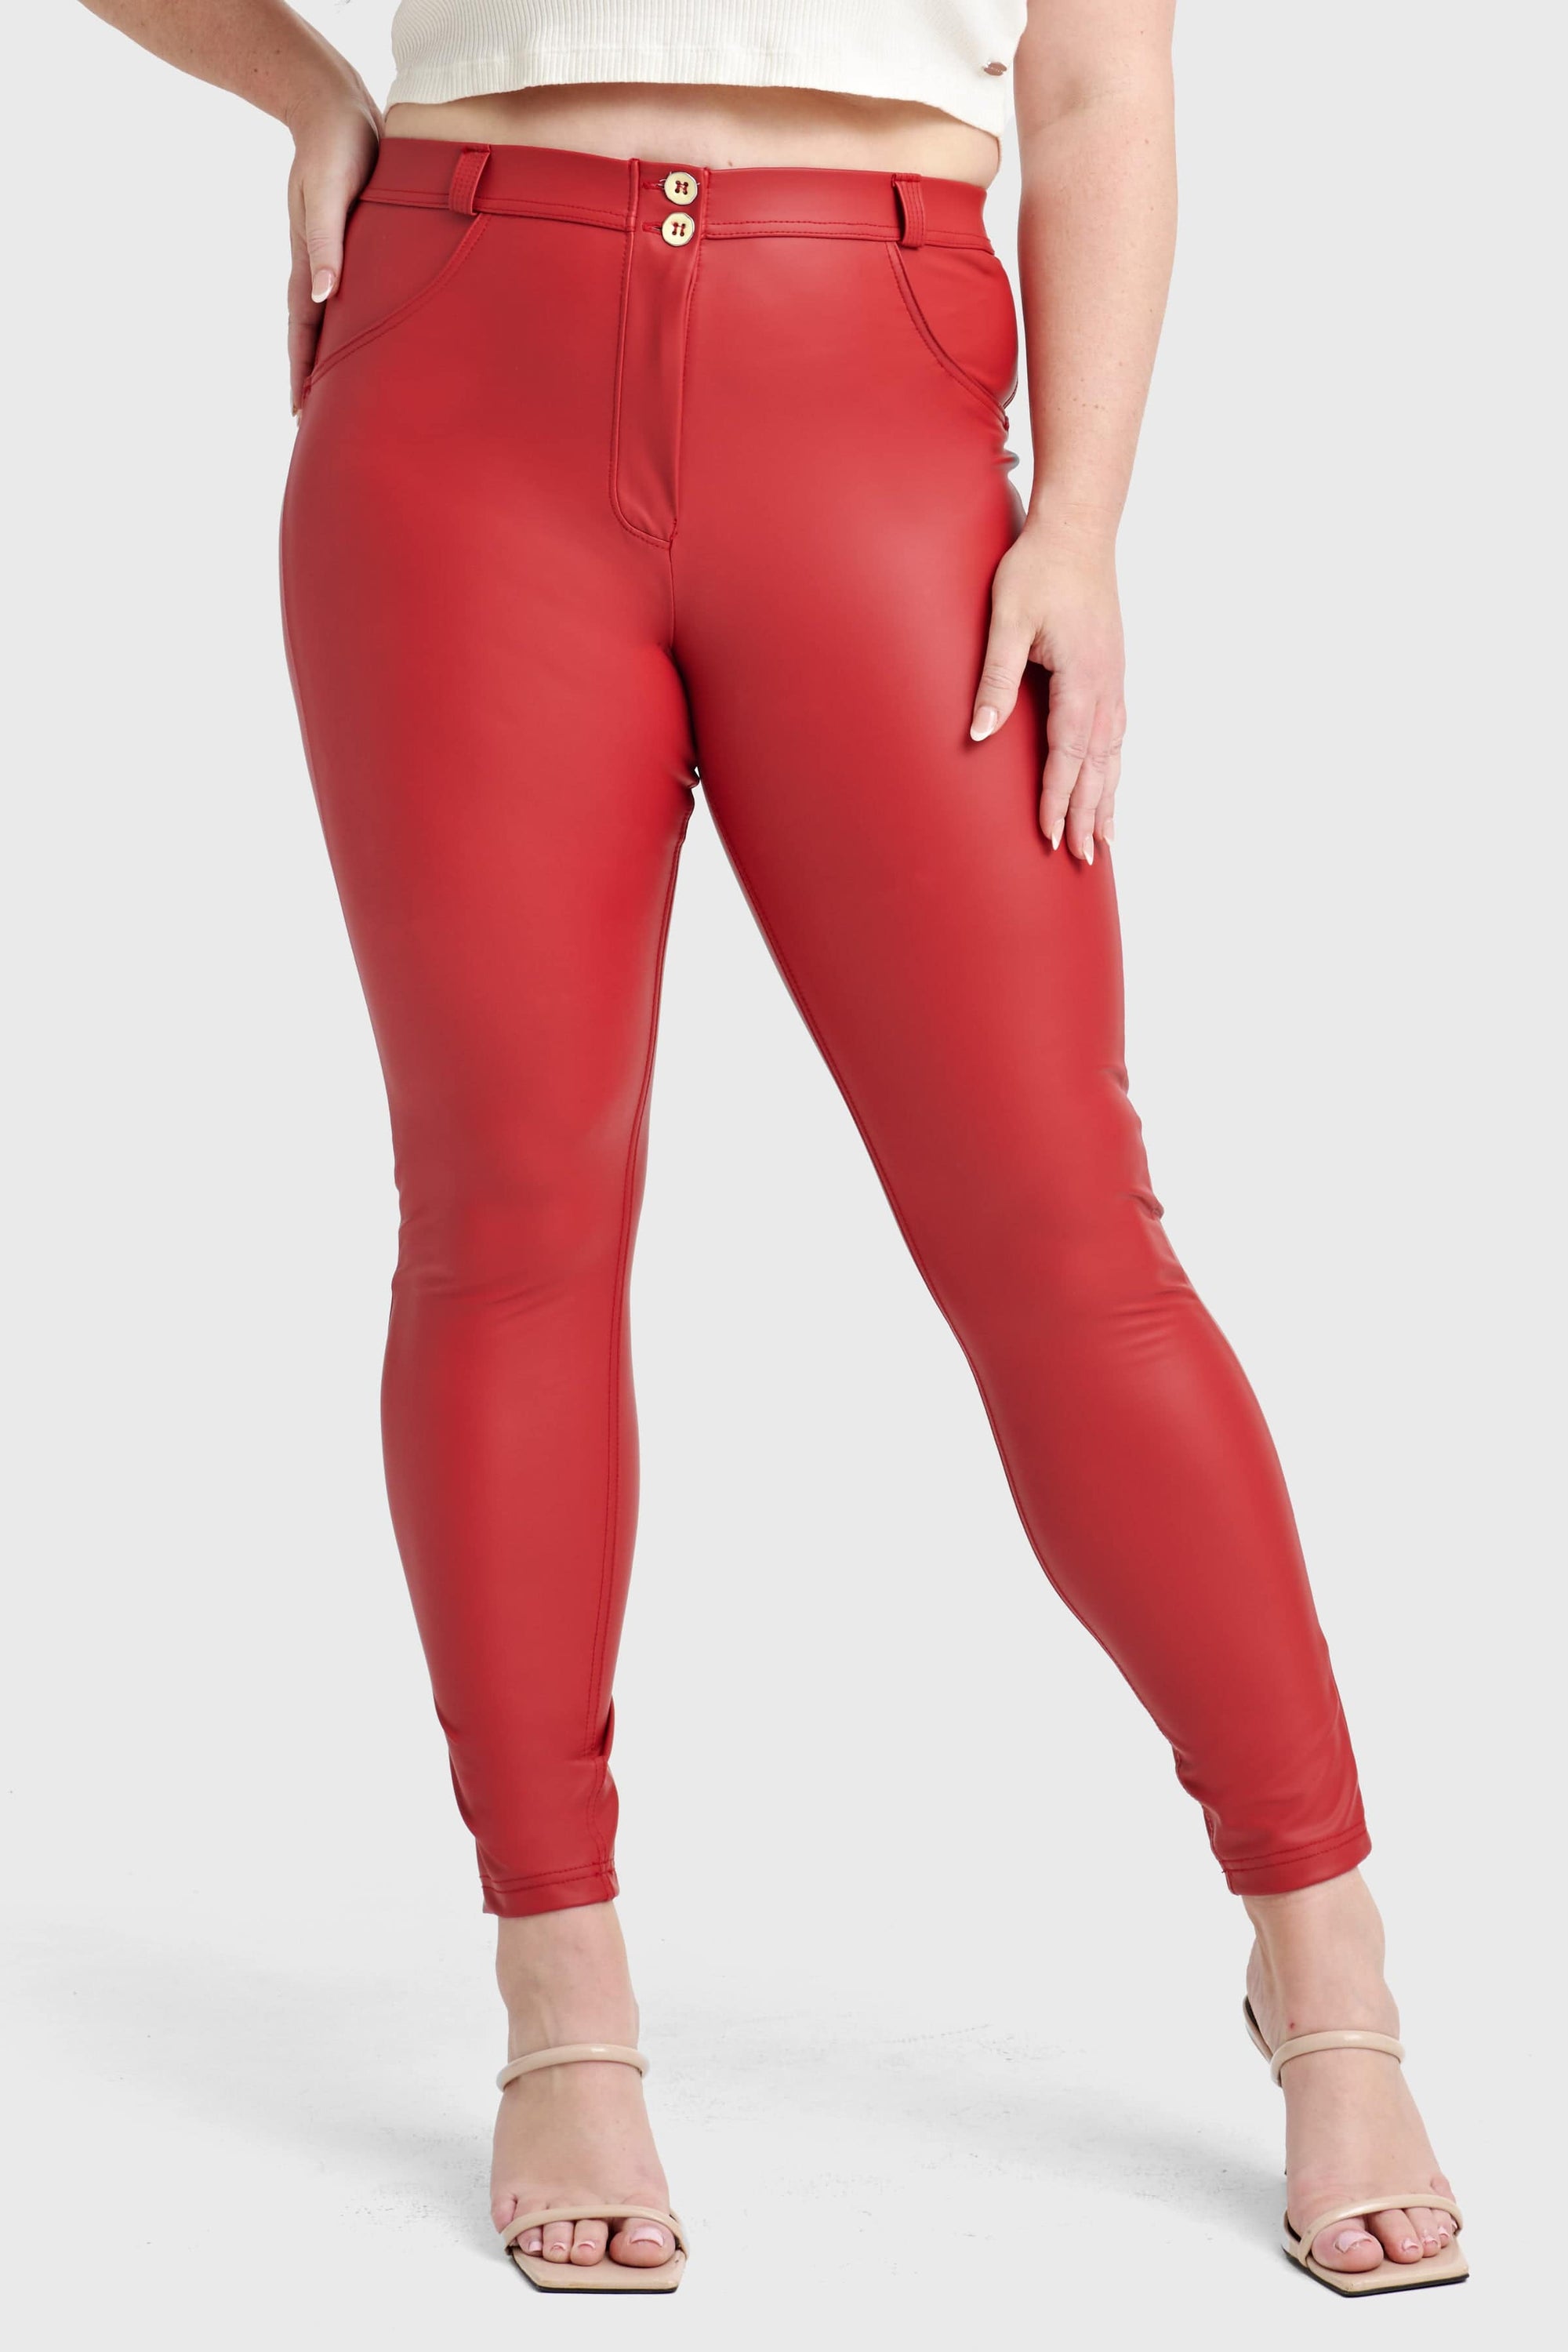 WR.UP® Curvy Faux Leather - High Waisted - Full Length - Red 5